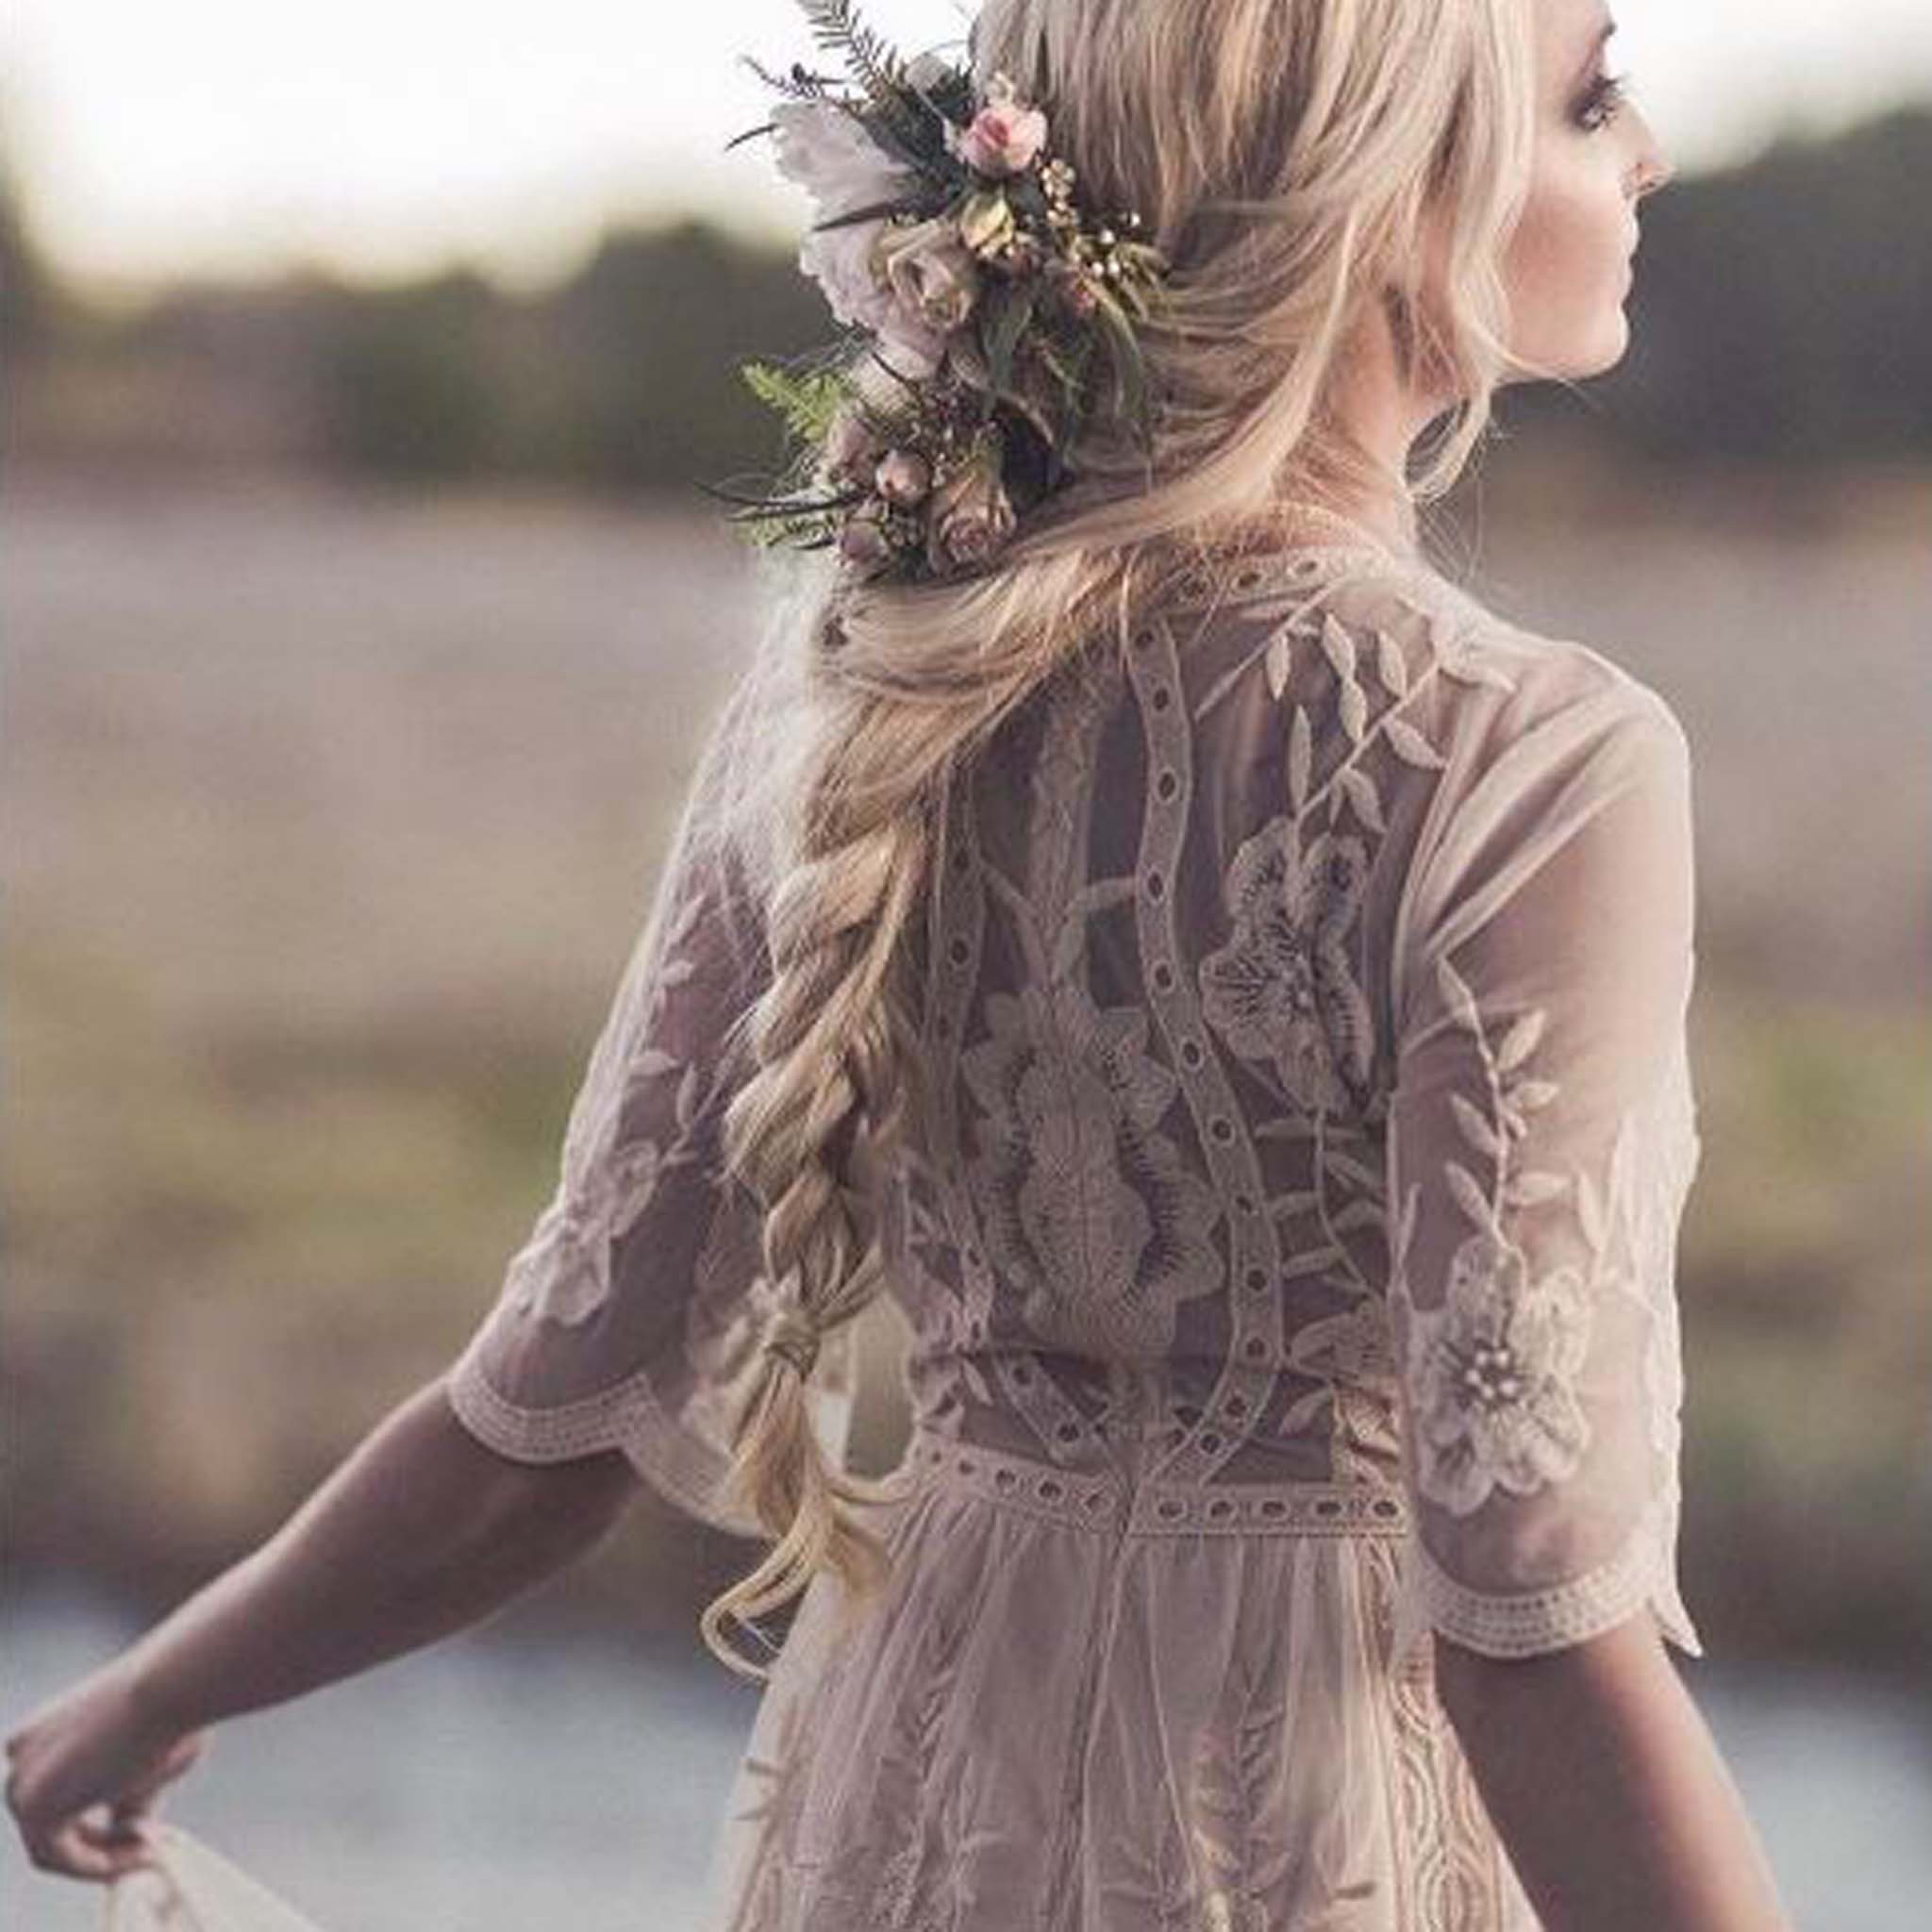 Tainted Rose Lace Maxi Dress in Sand